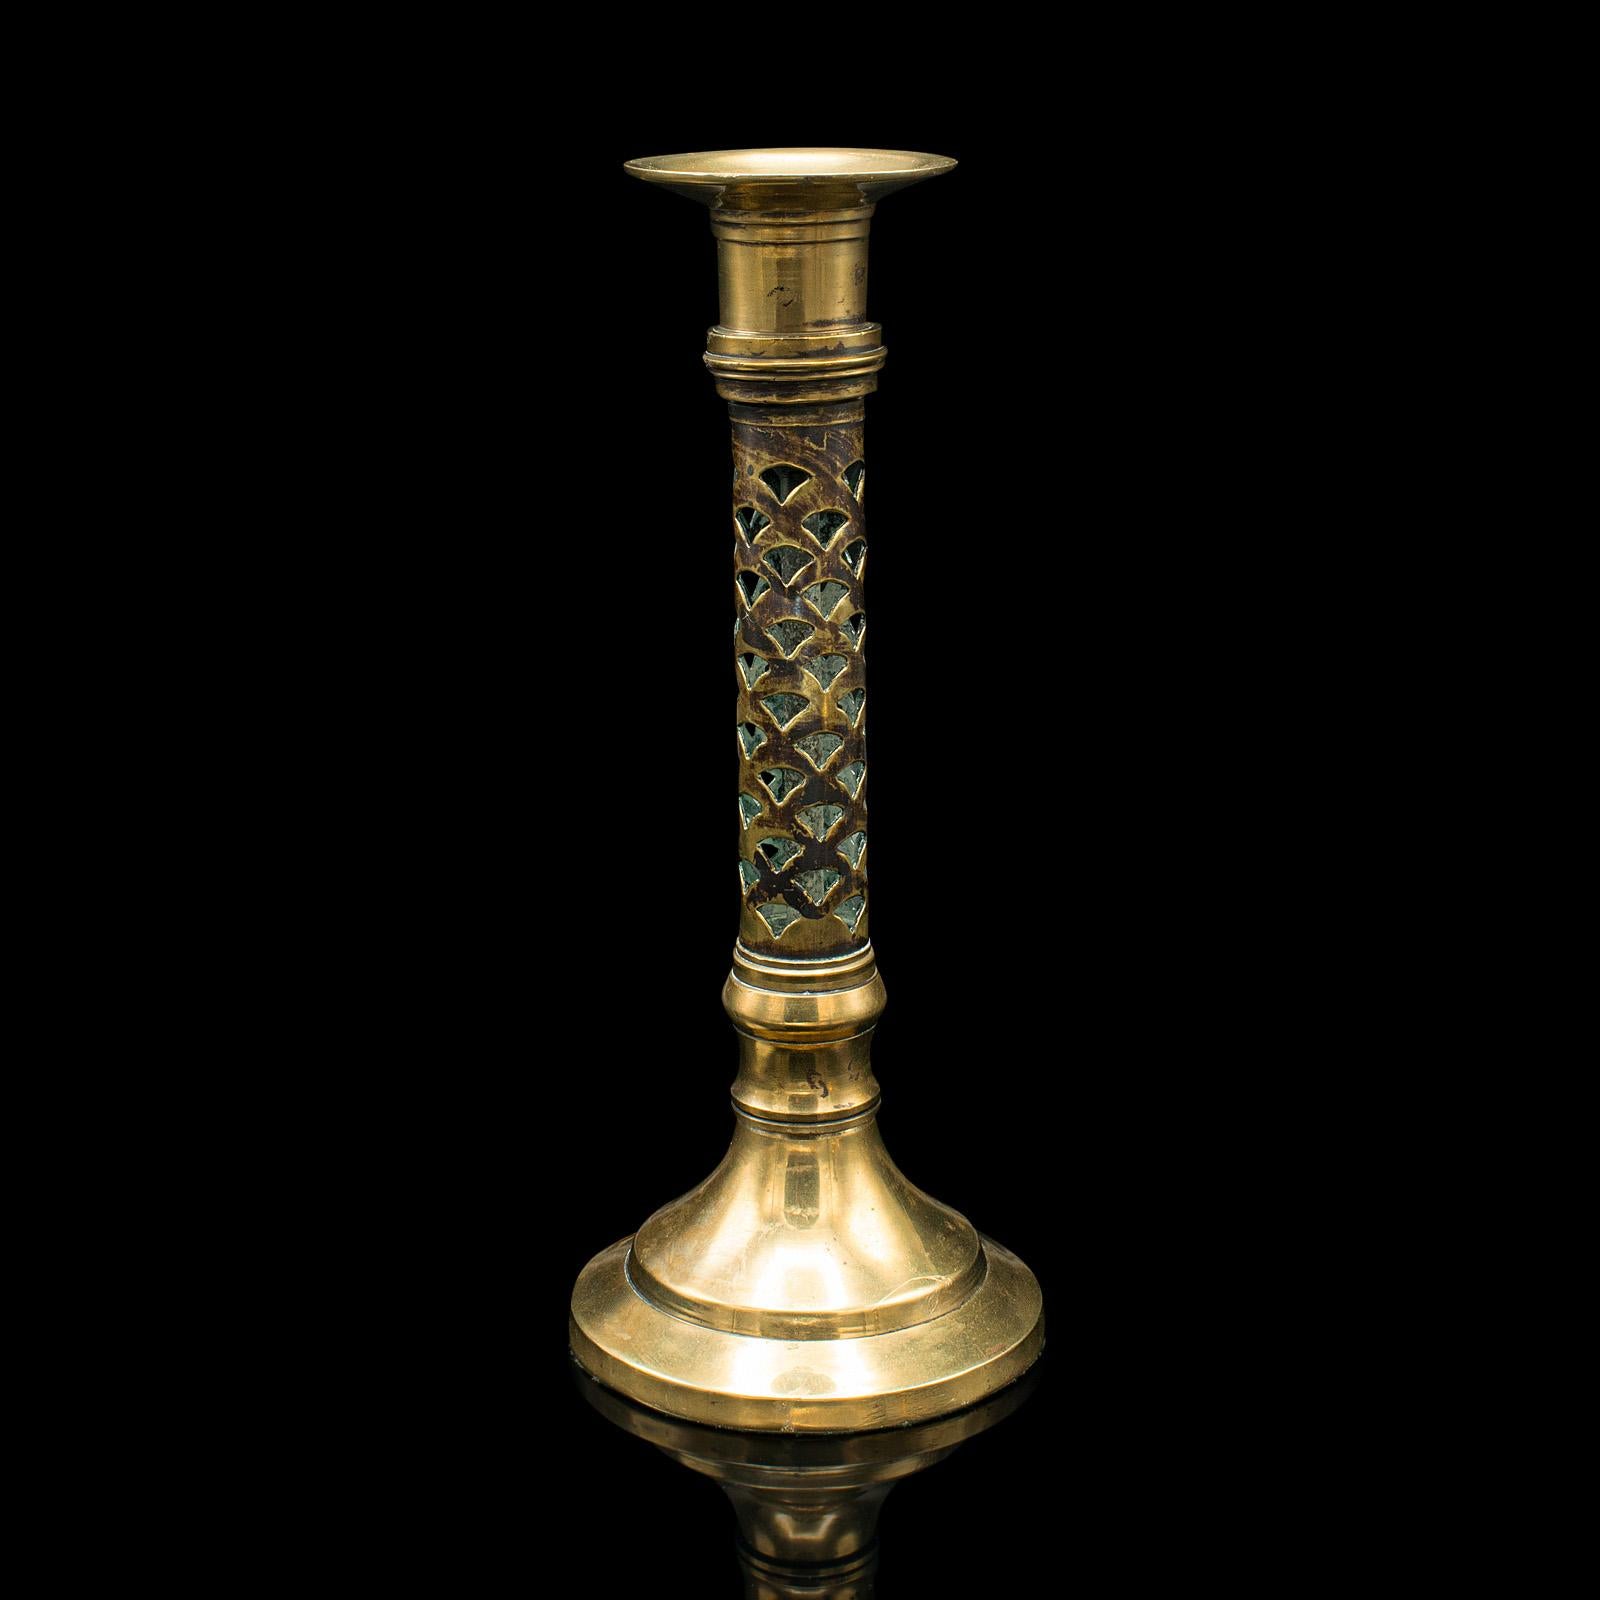 Antique Ecclesiastical Candlesticks, English, Brass, Aesthetic Period, Victorian In Good Condition For Sale In Hele, Devon, GB